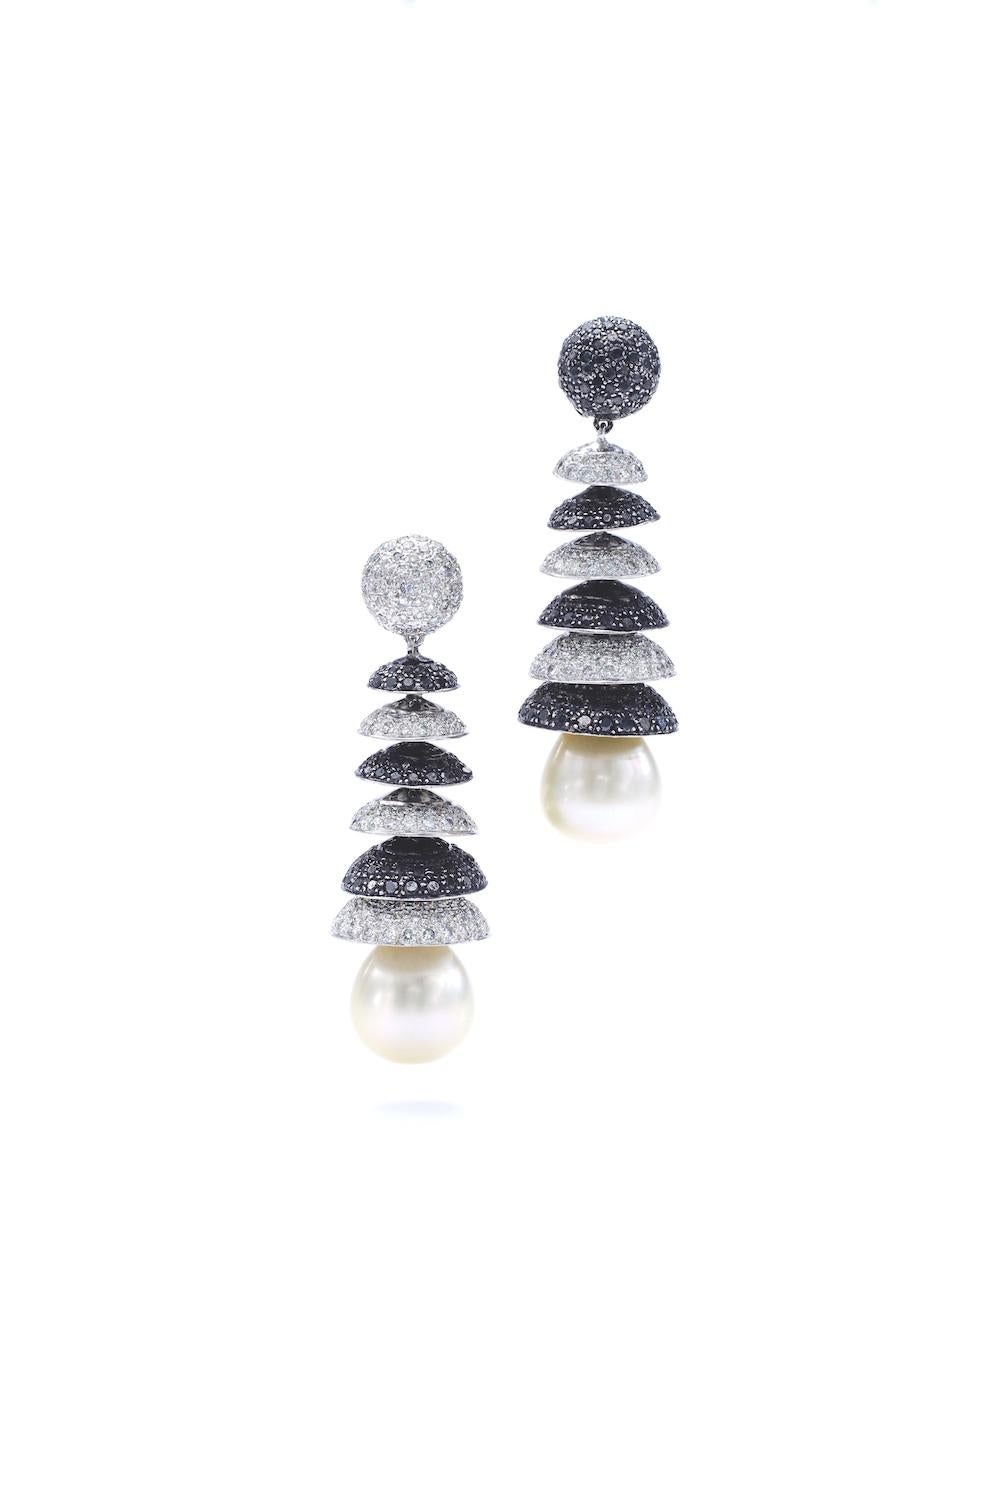 Contemporary Black and White Diamond and Pearl Ear Pendants